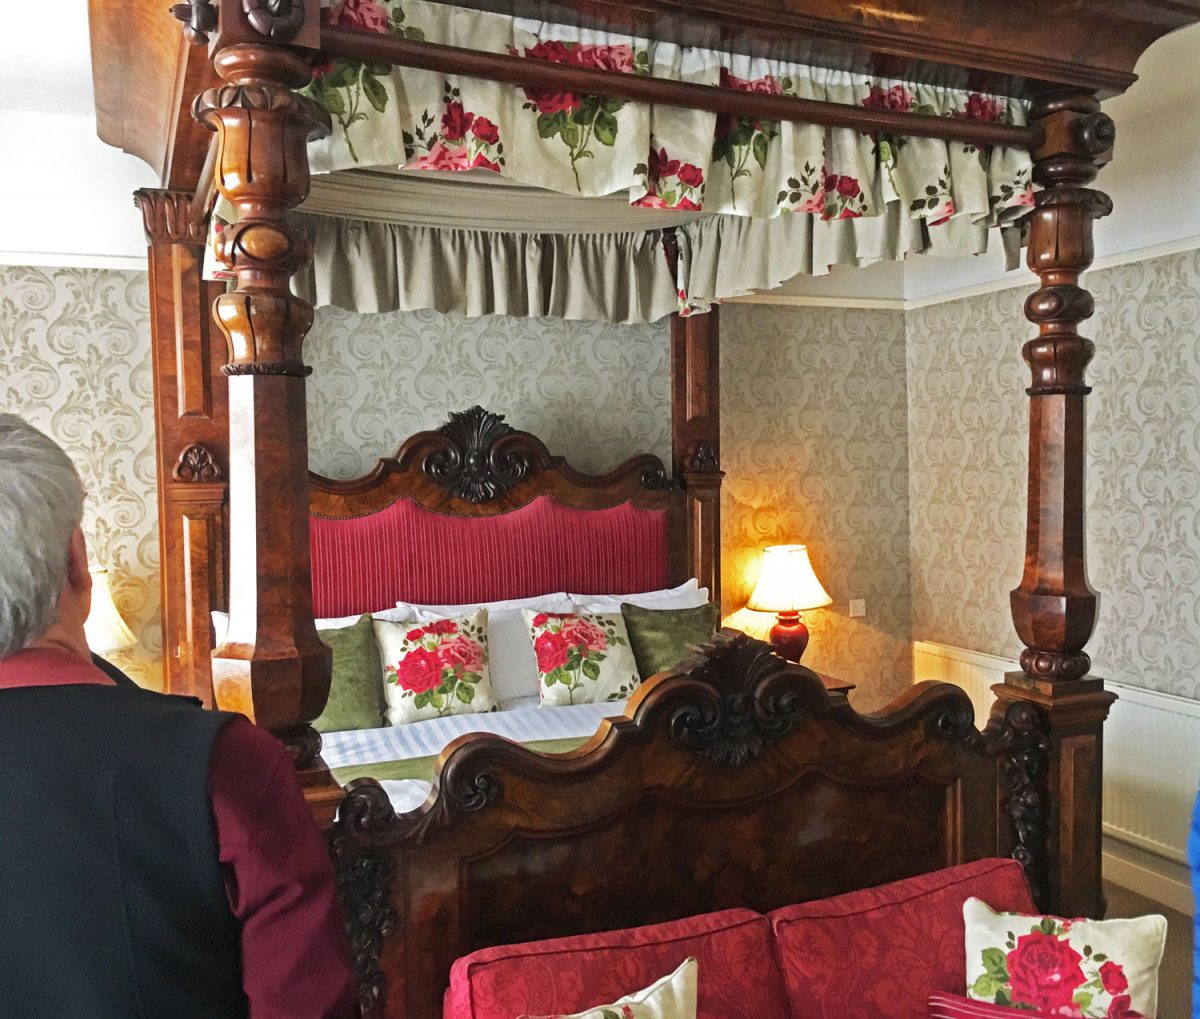 A photo of a four poster bed at the Speech House Hotel